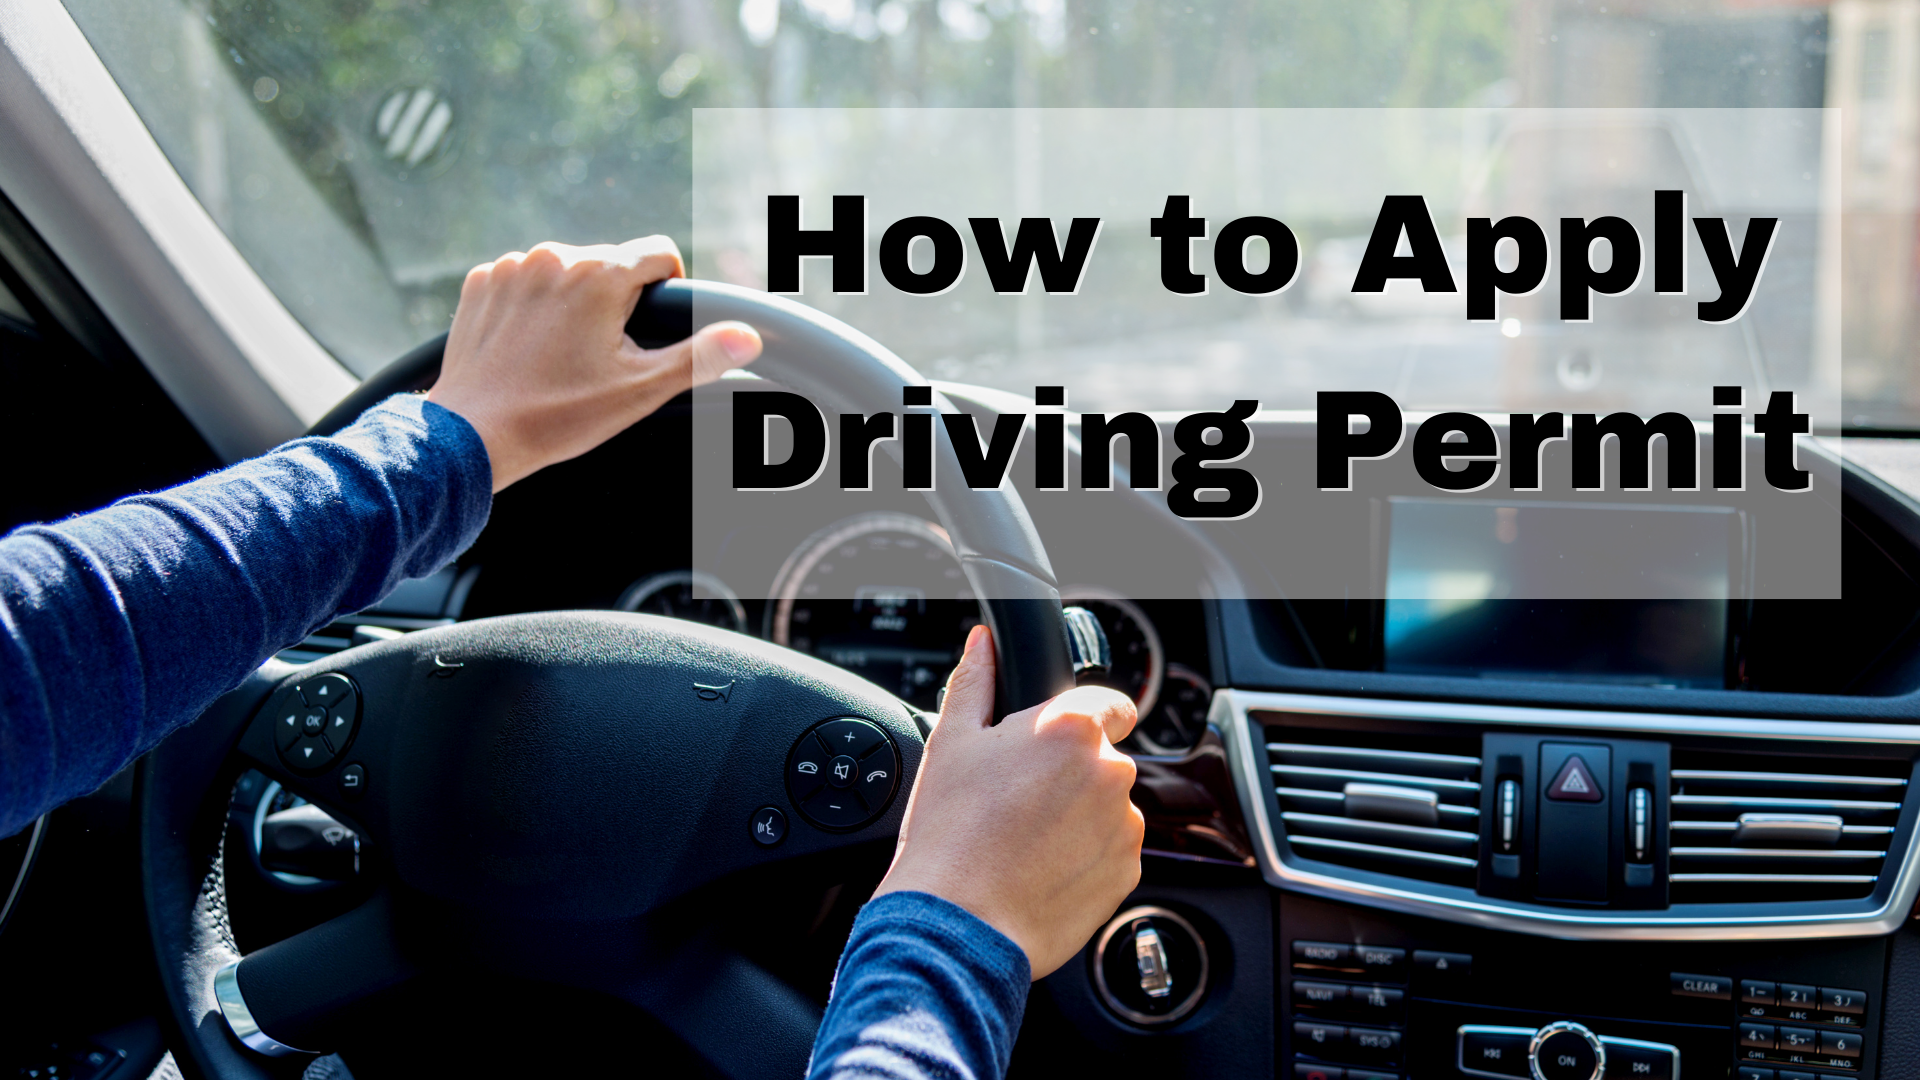 How to Apply Driving Permit